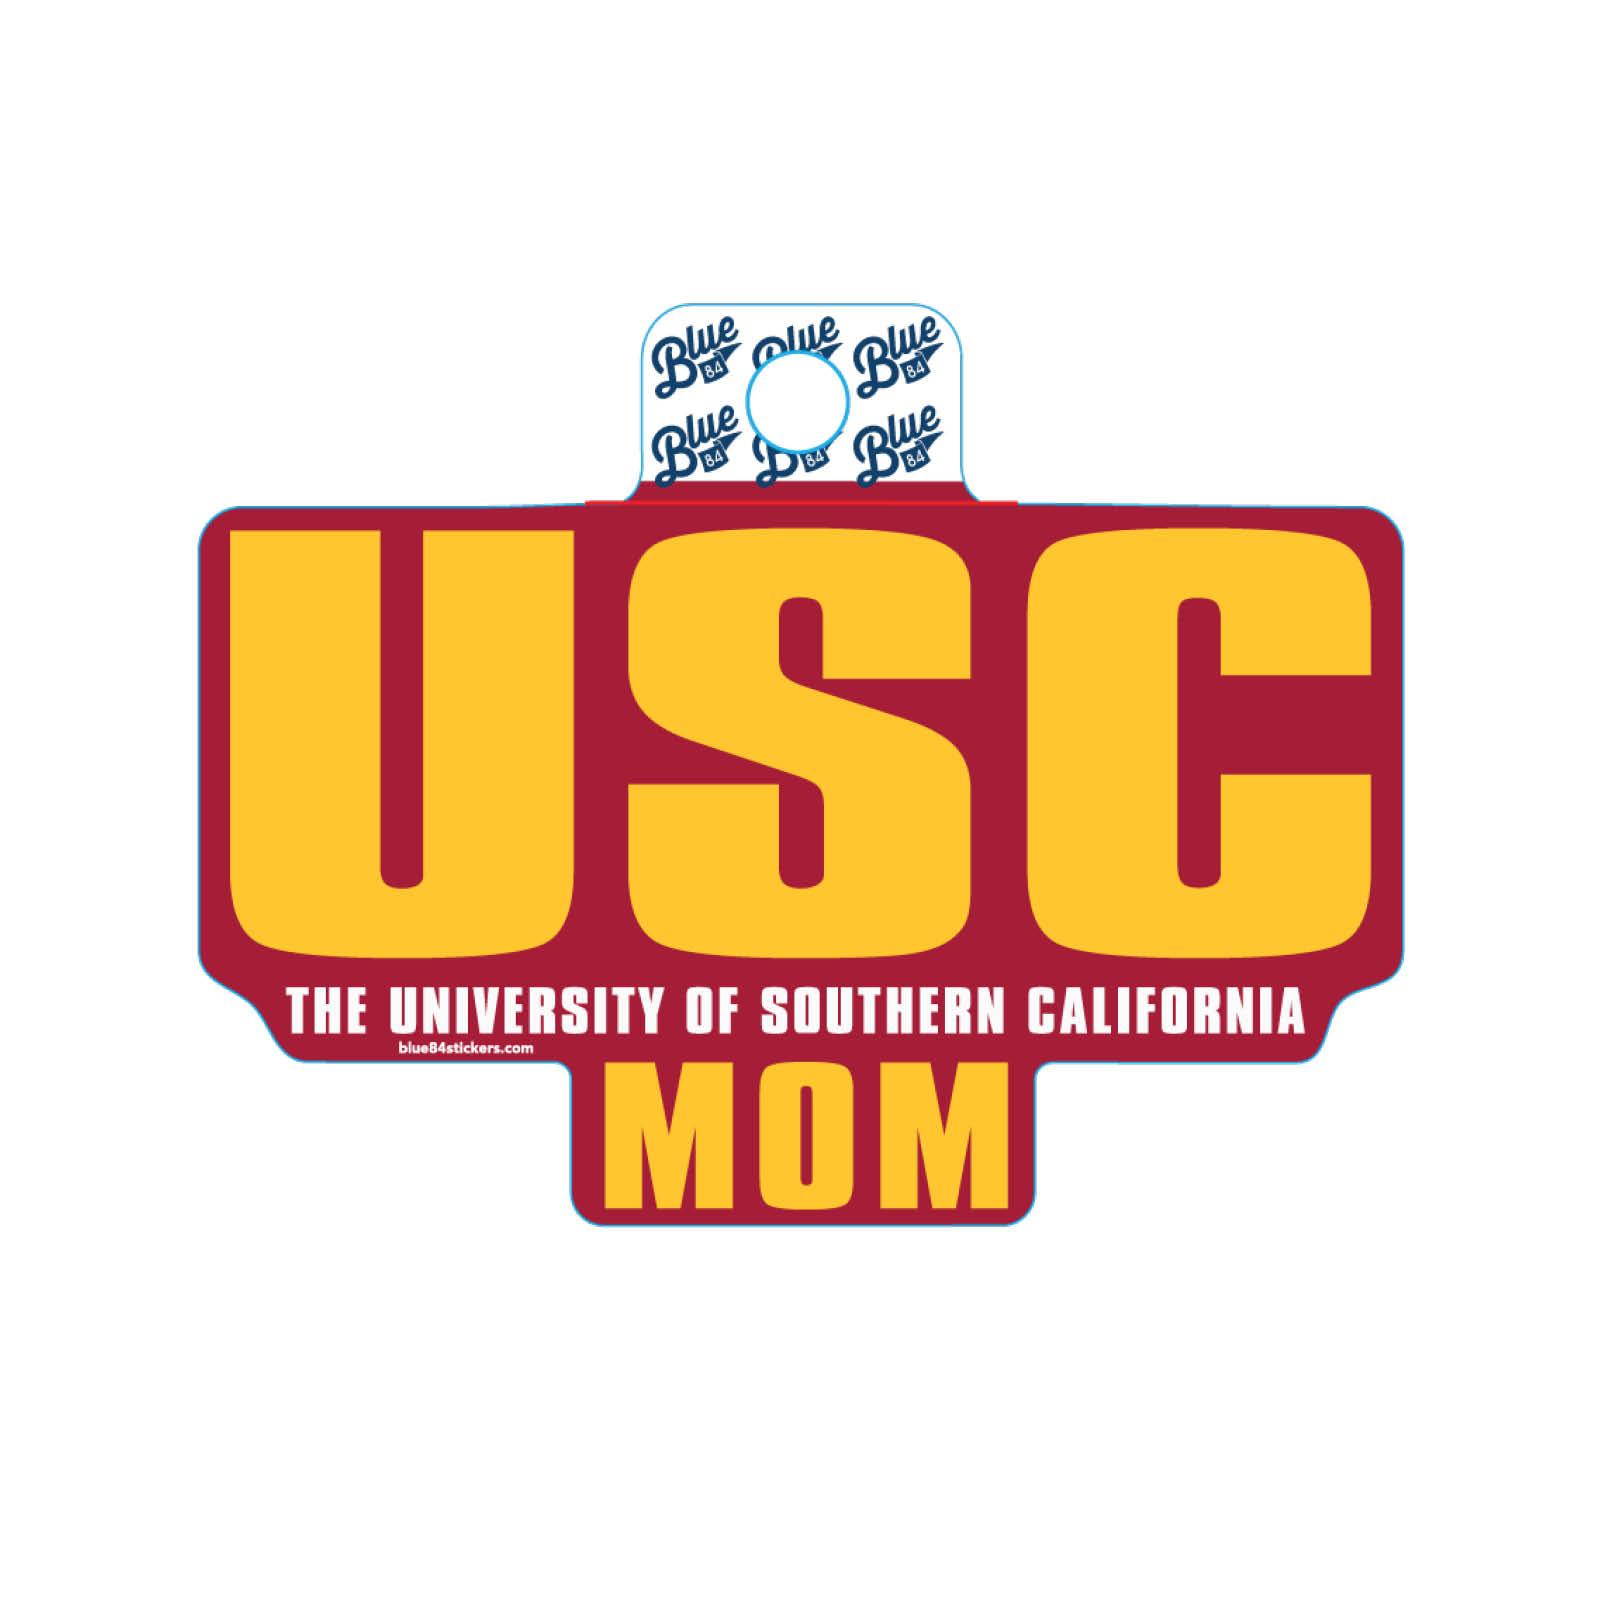 USC Mom See Through Sticker by Blue 84 image01